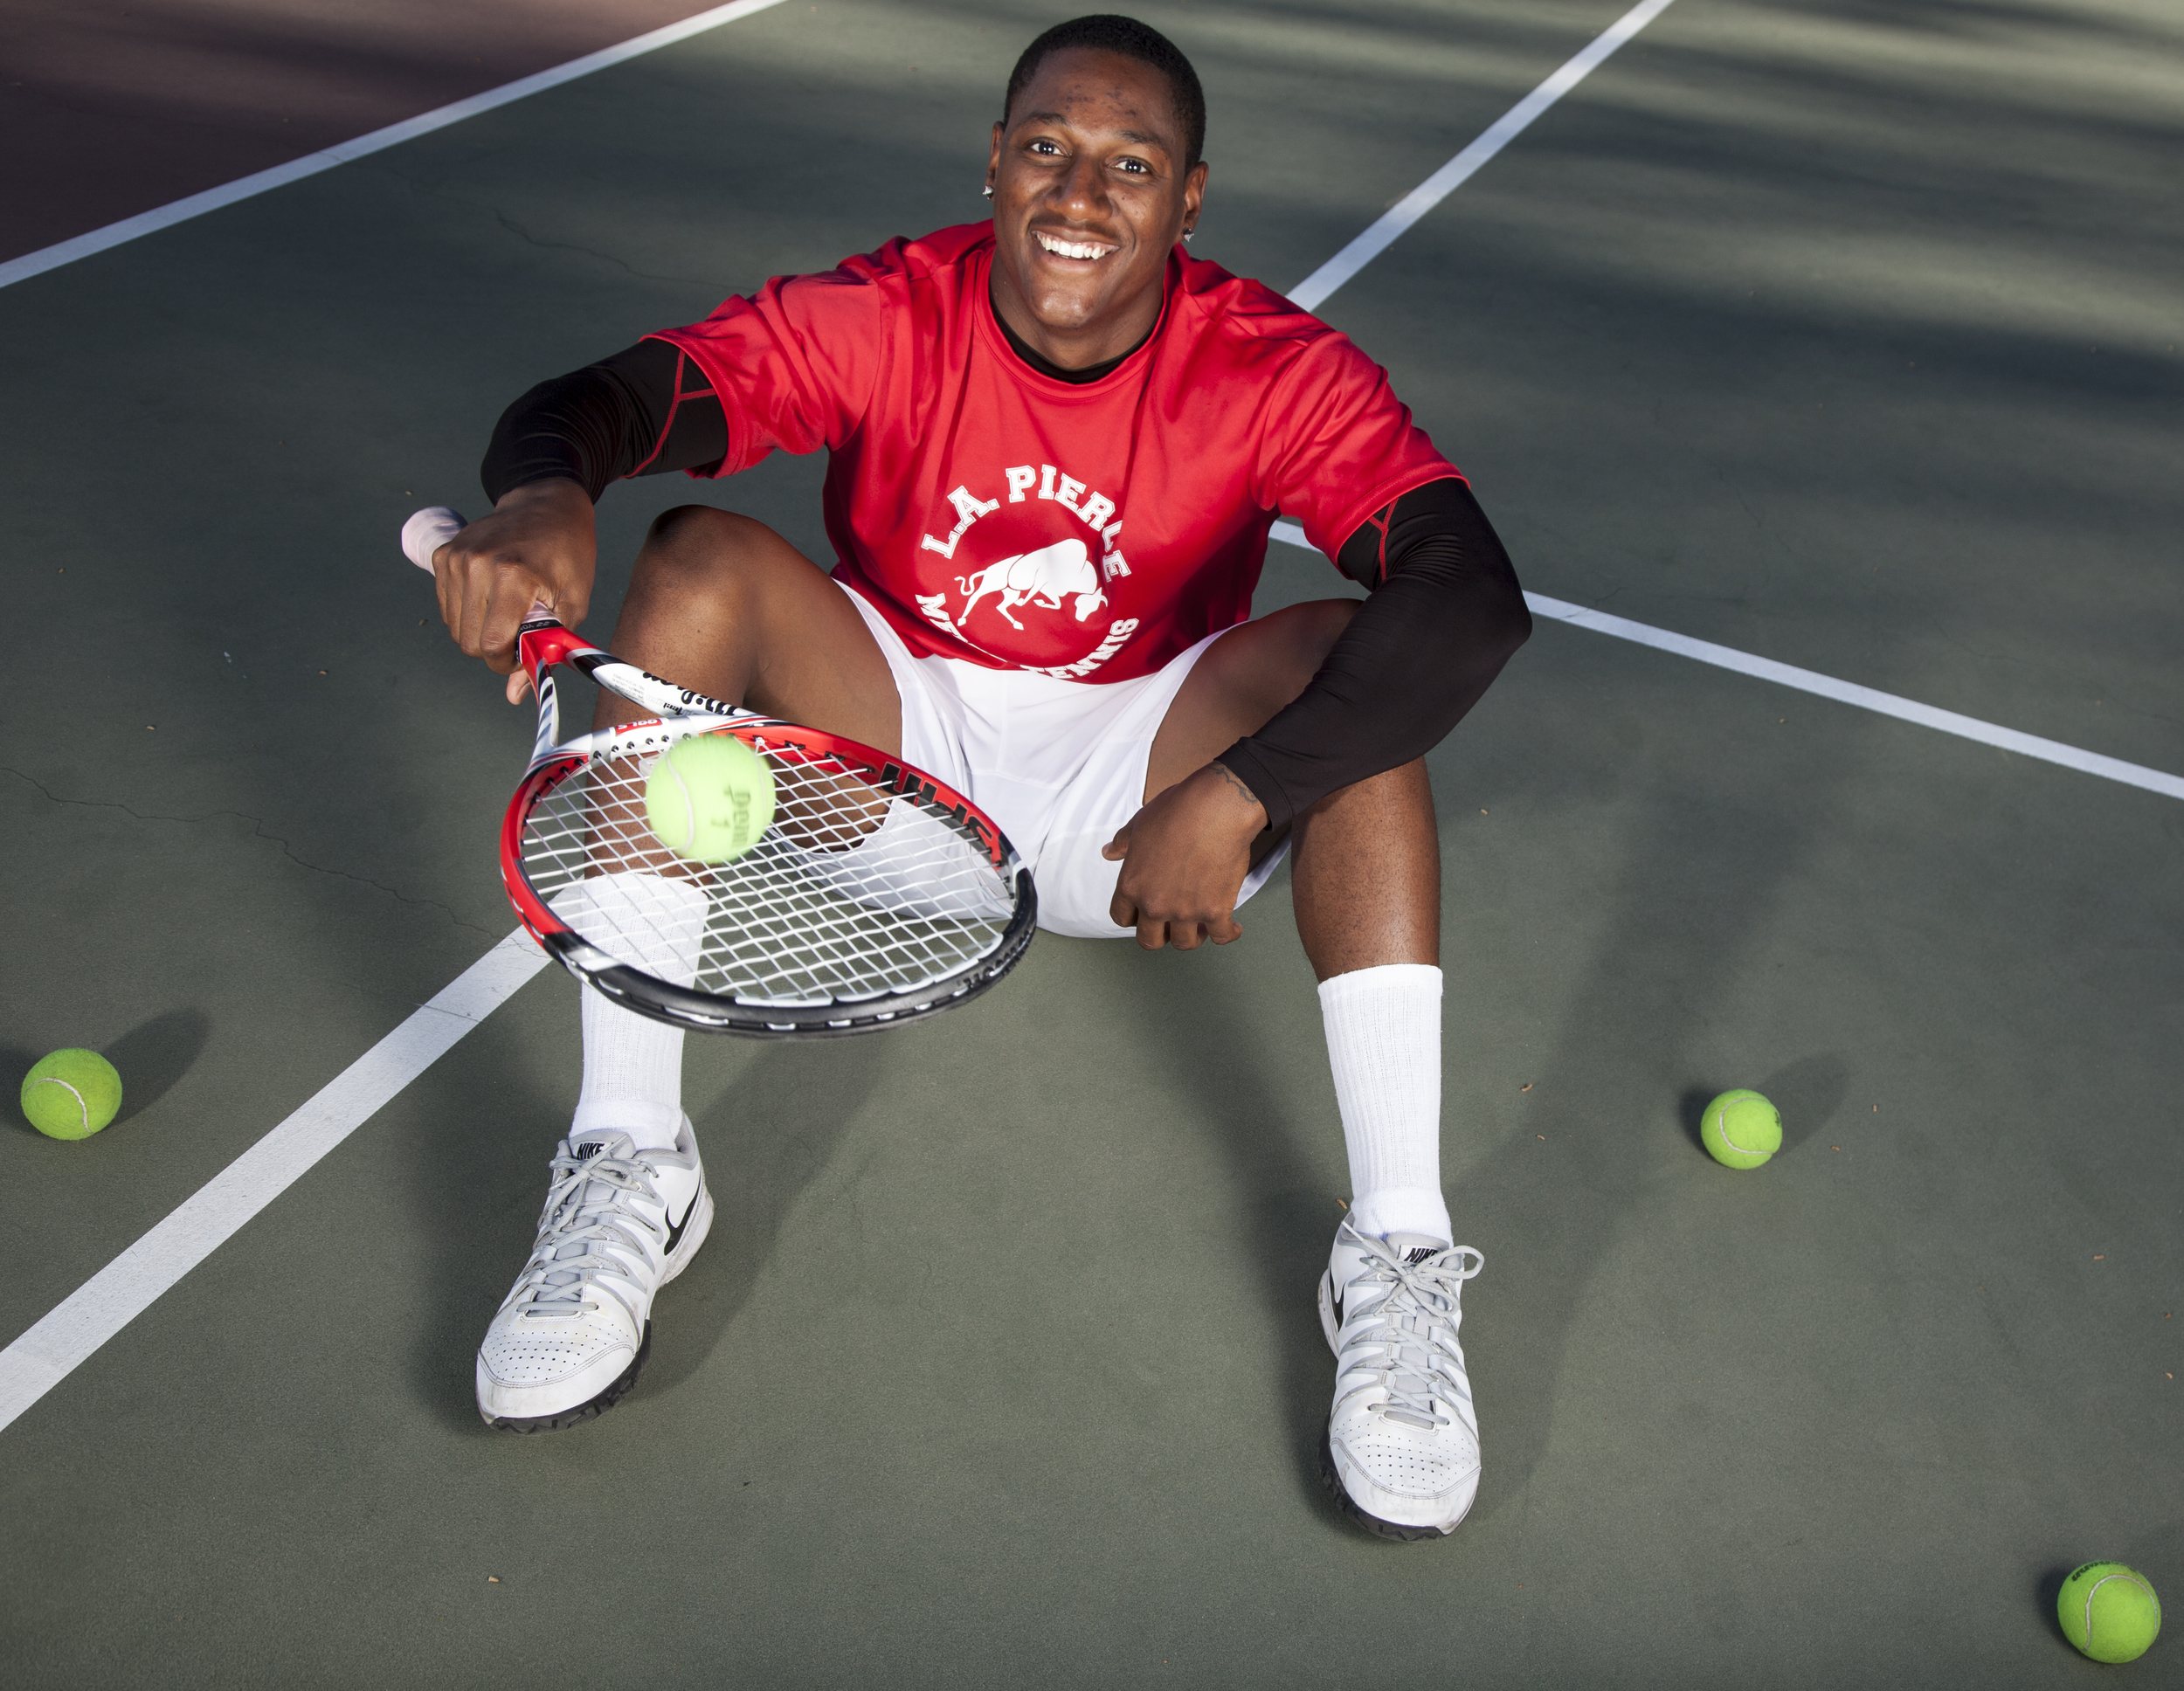  Jason Sturdivant, captain of both the tennis and football team and an Army vet, poses on the tennis court of Pierce College on Thursday, March 12, 2015. Woodland Hills, Calif.  Read the full story&nbsp; here  